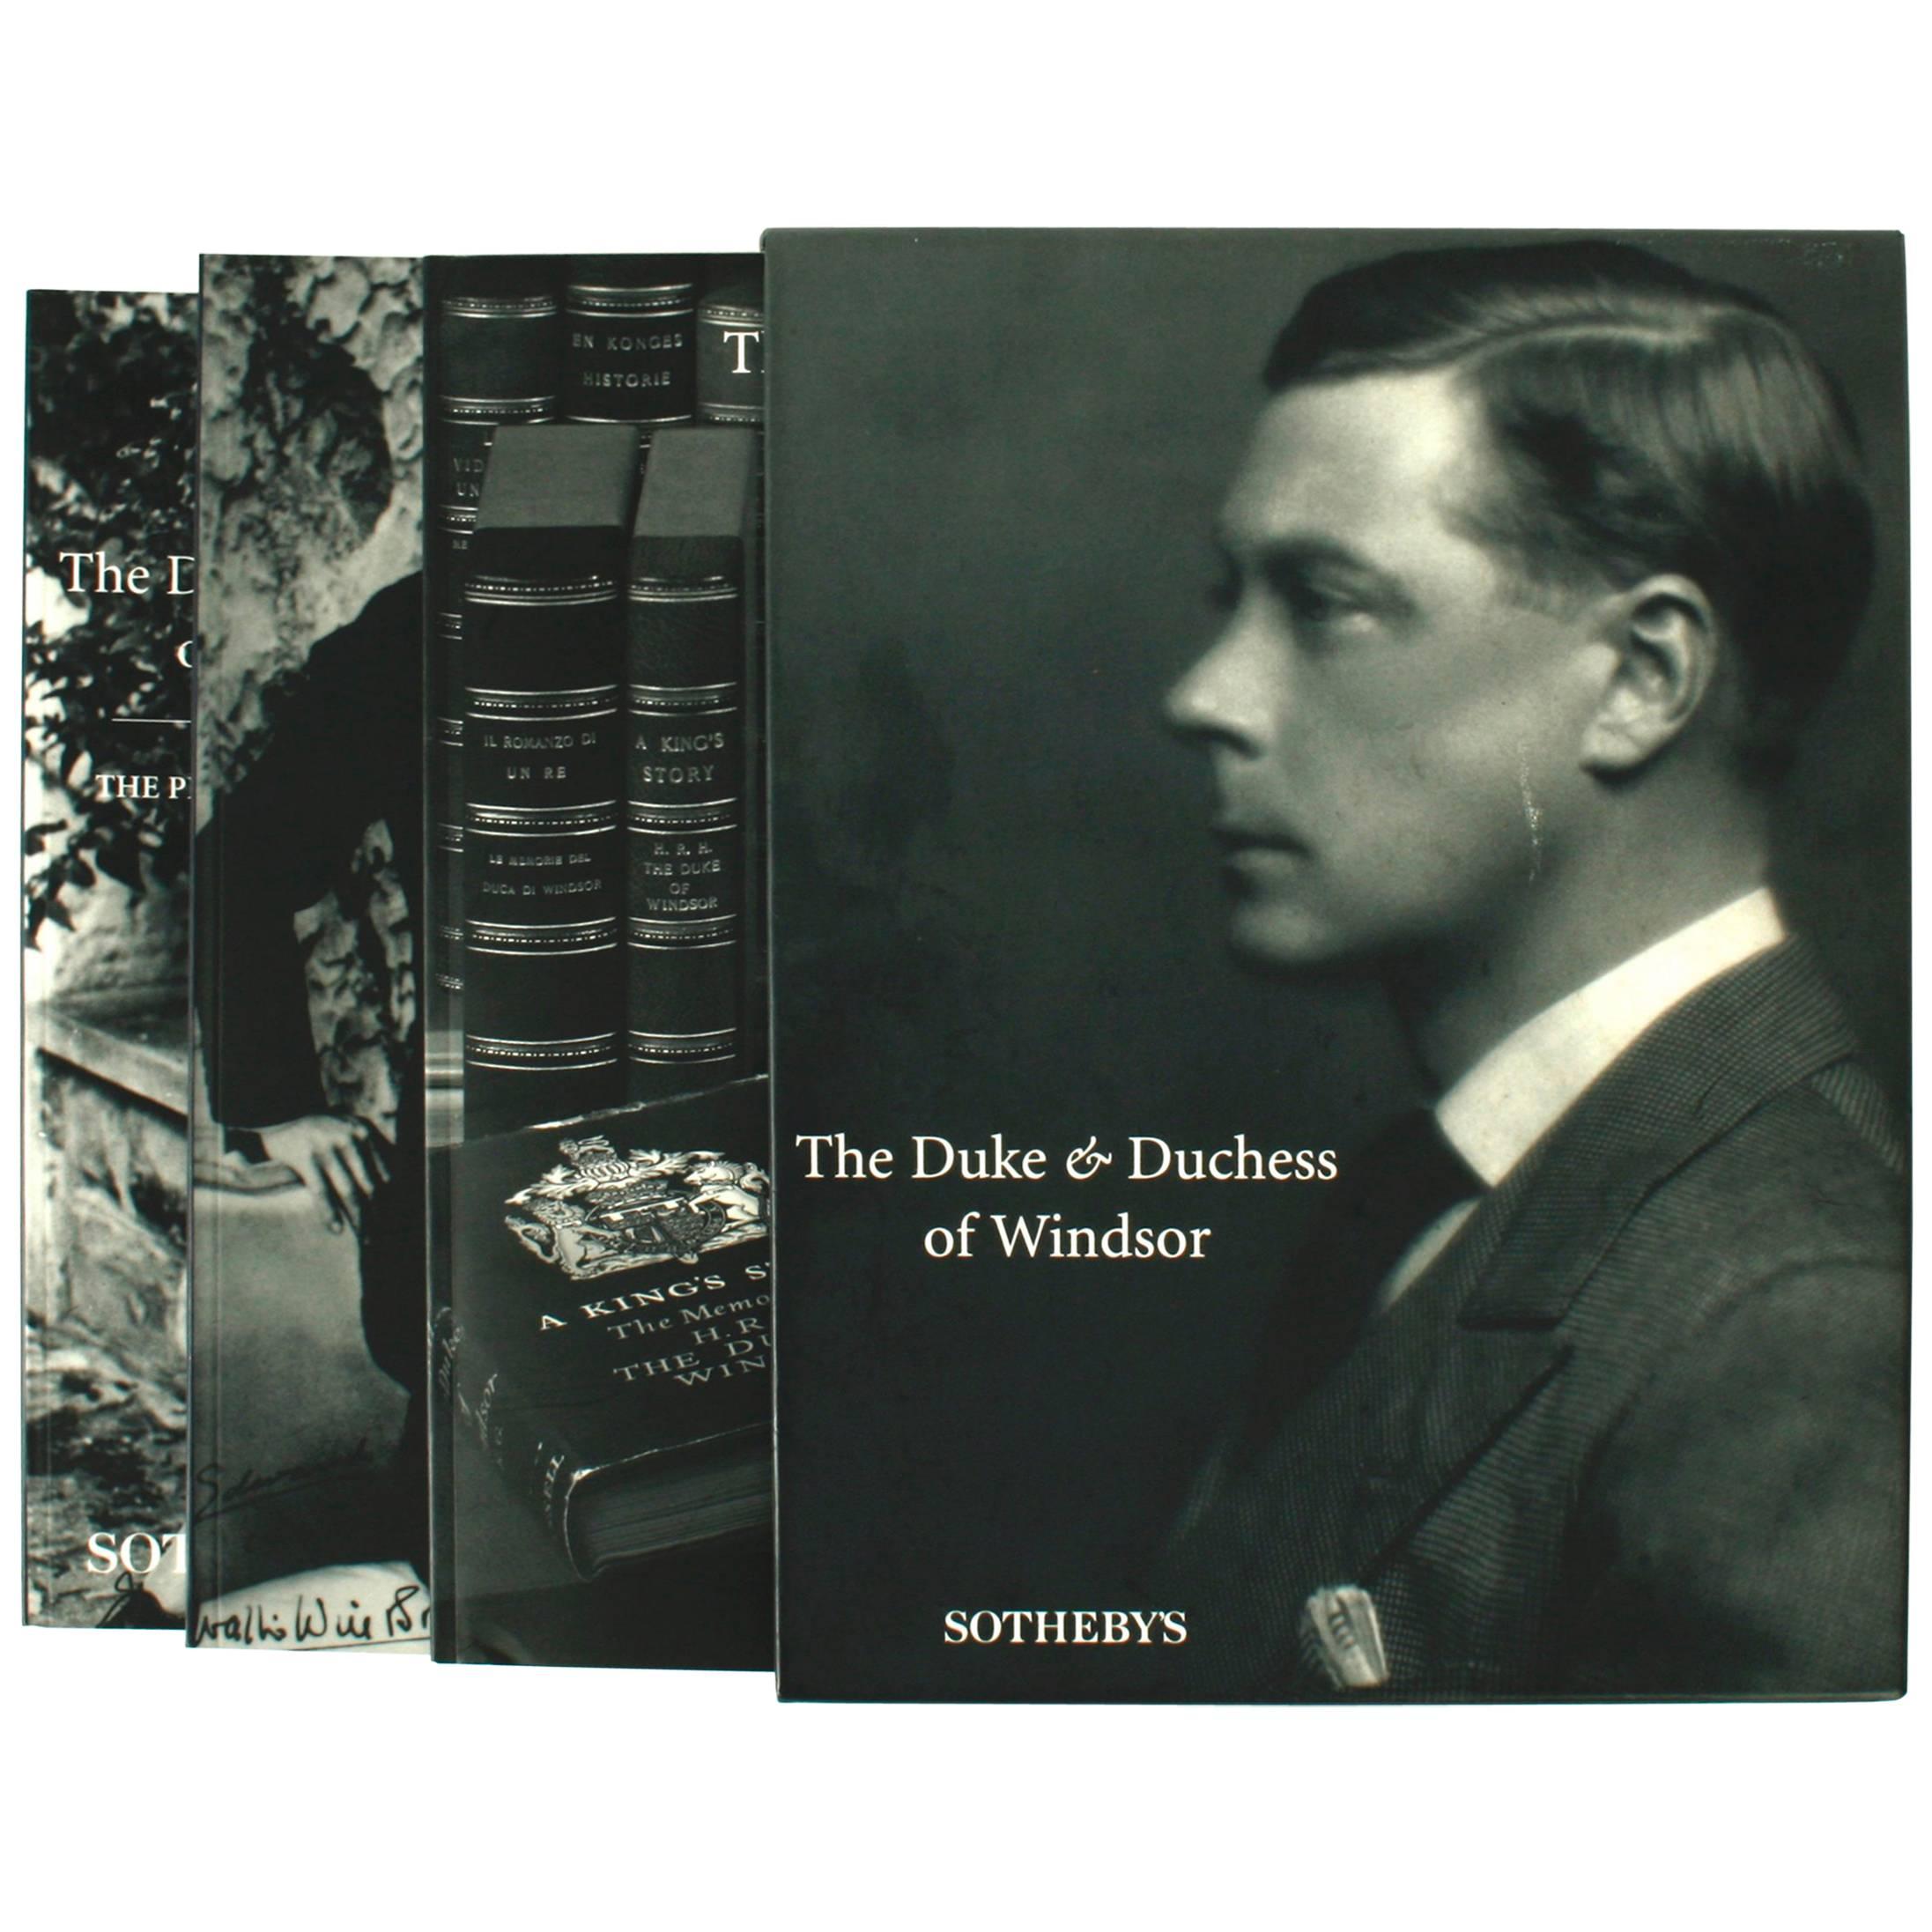 Sotheby's Catalogues from the Duke & Duchess of Windsor Auction